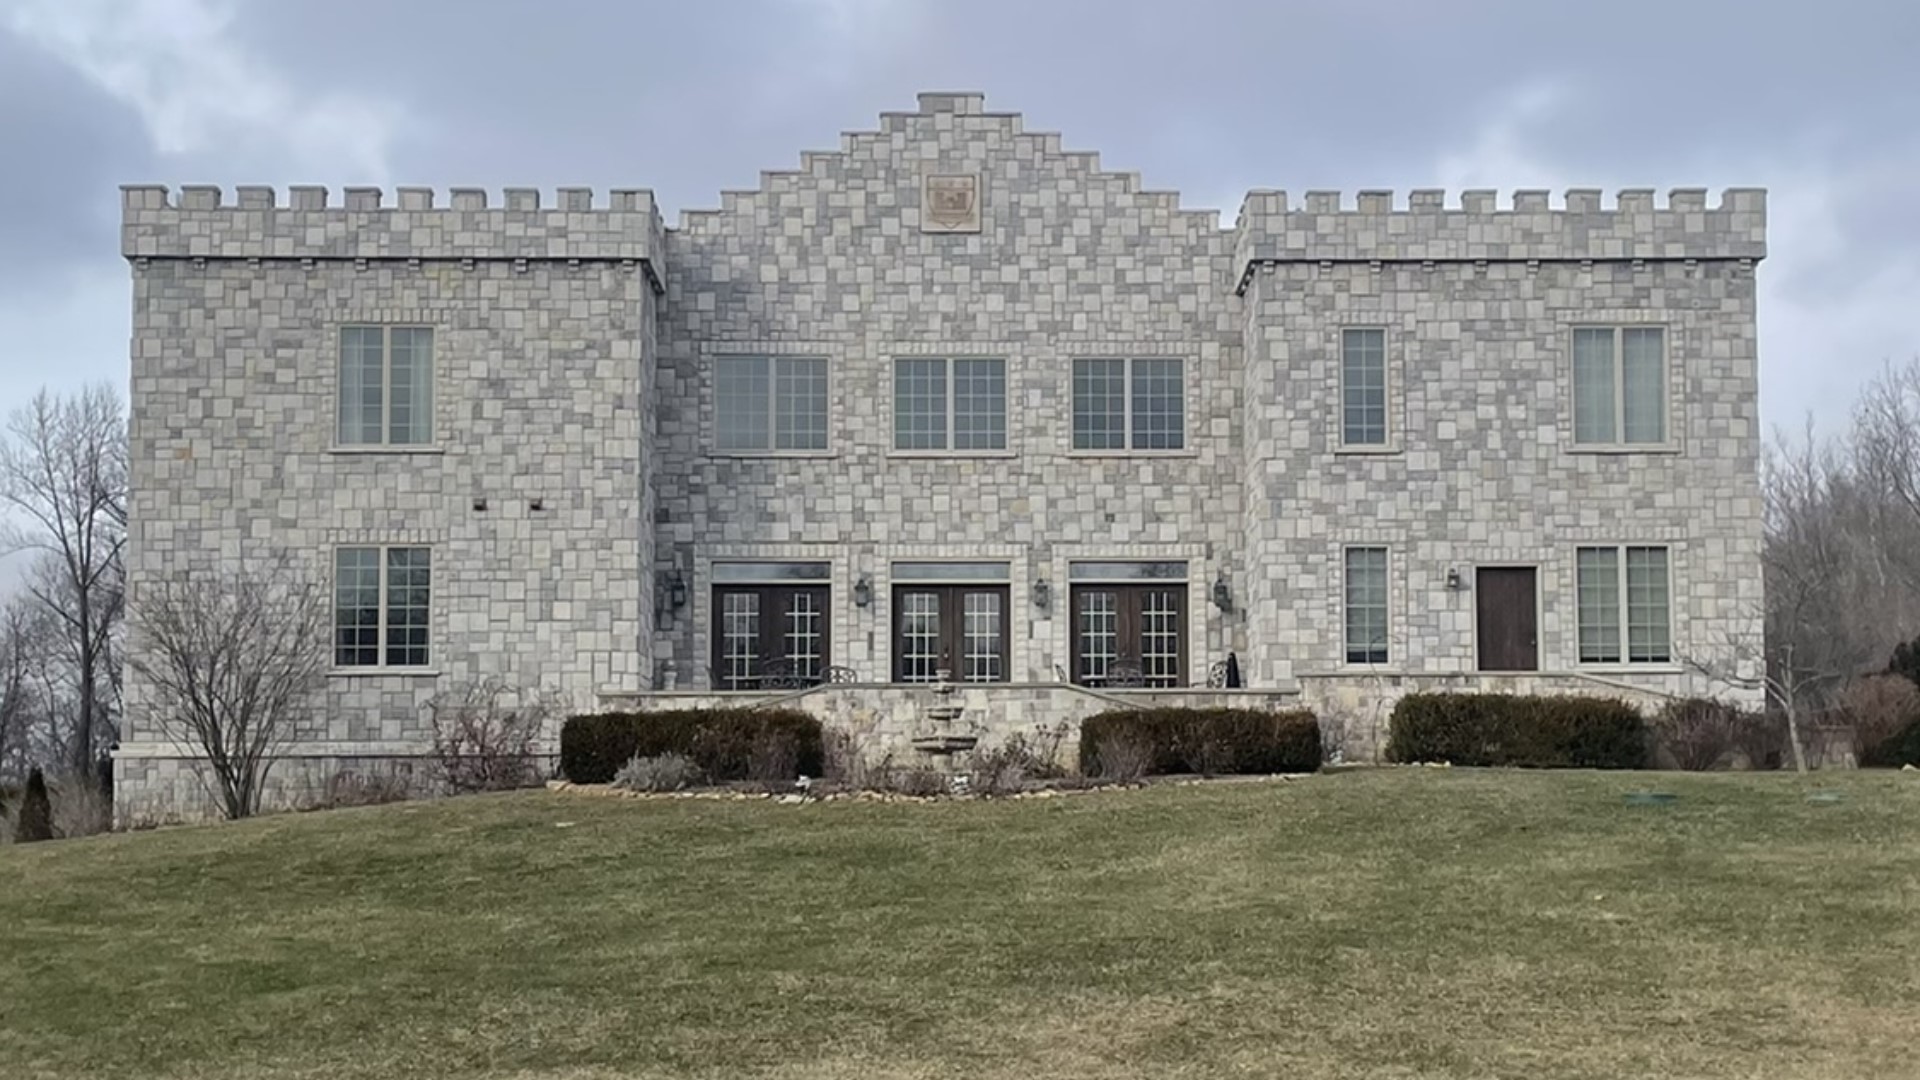 Clayshire Castle, located in Bowling Green, Indiana, gives guests a once-in-a-lifetime throwback to a medieval fortress with modern amenities.